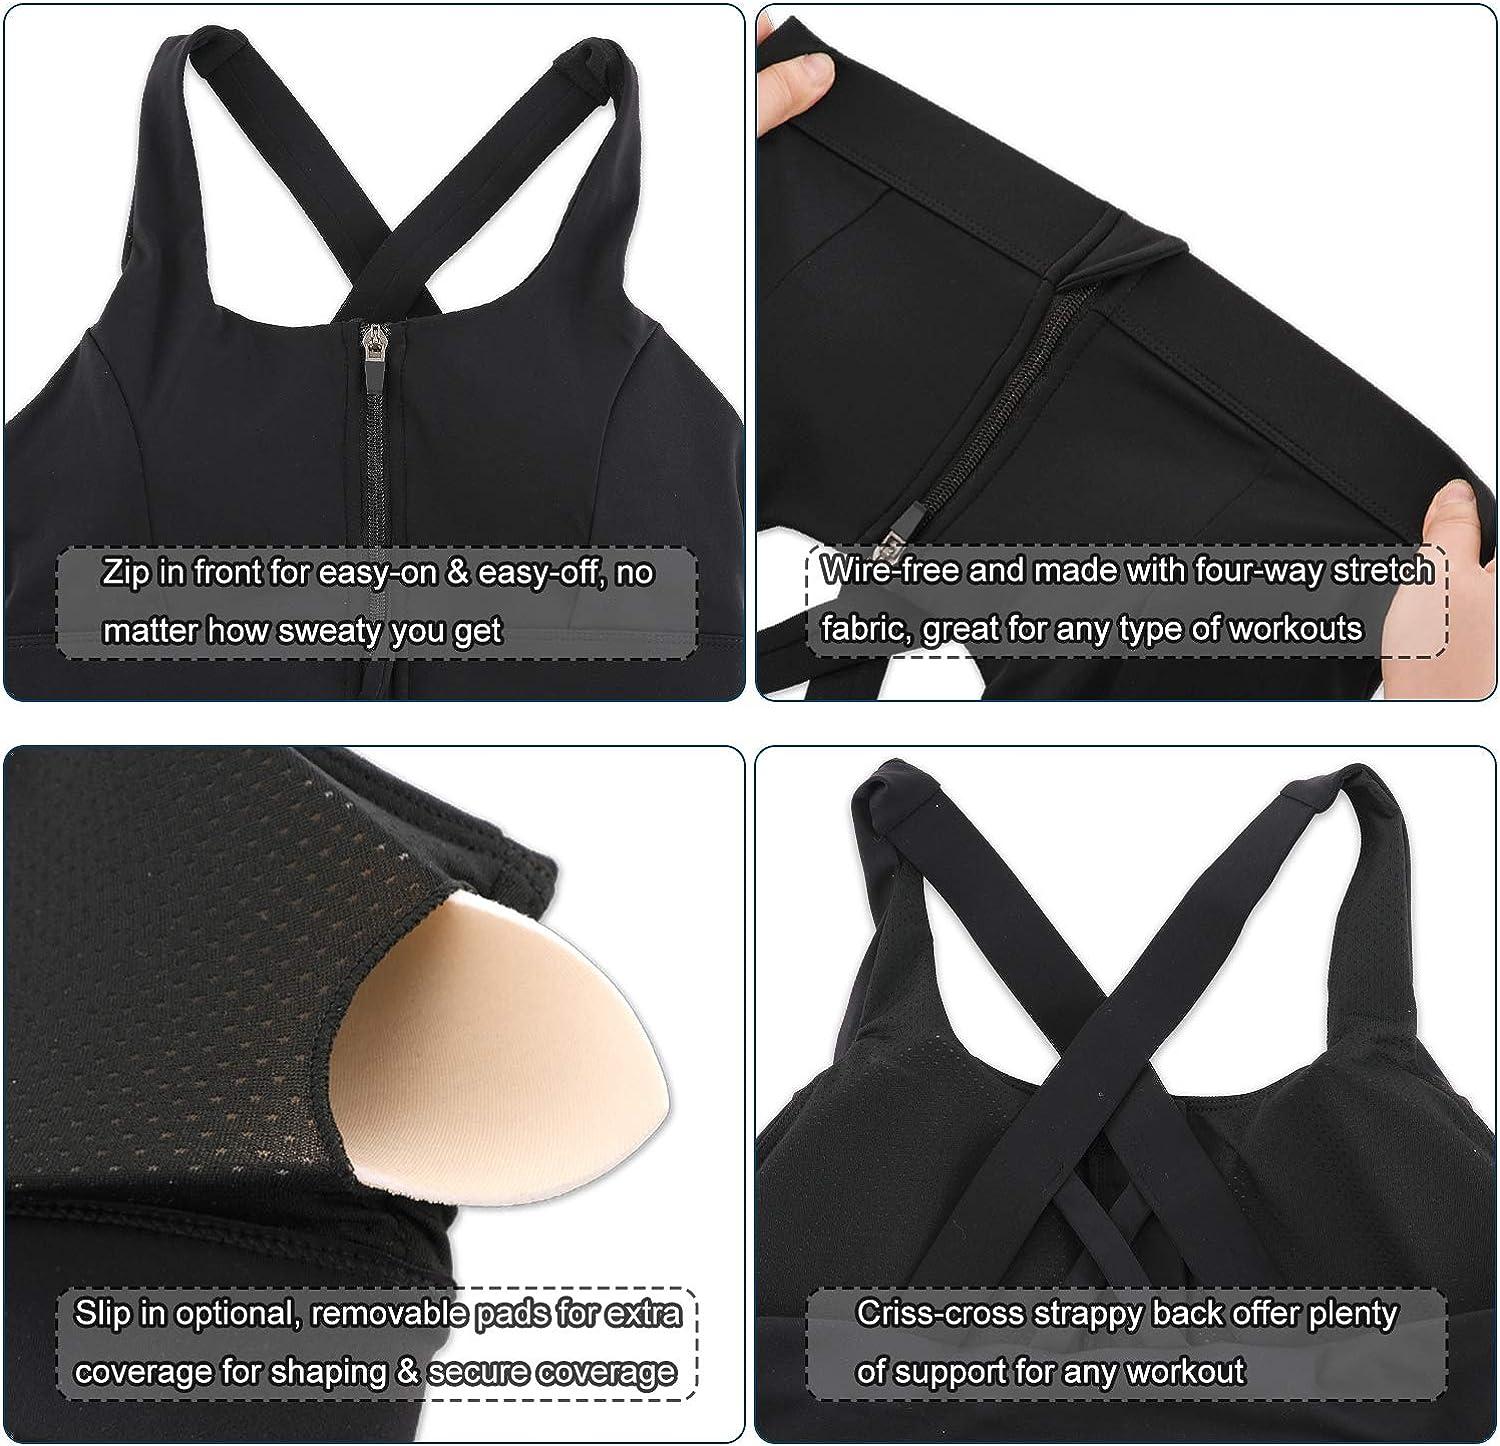 Cordaw Zip Front Sports Bra Molded Cup High Impact Adjustable